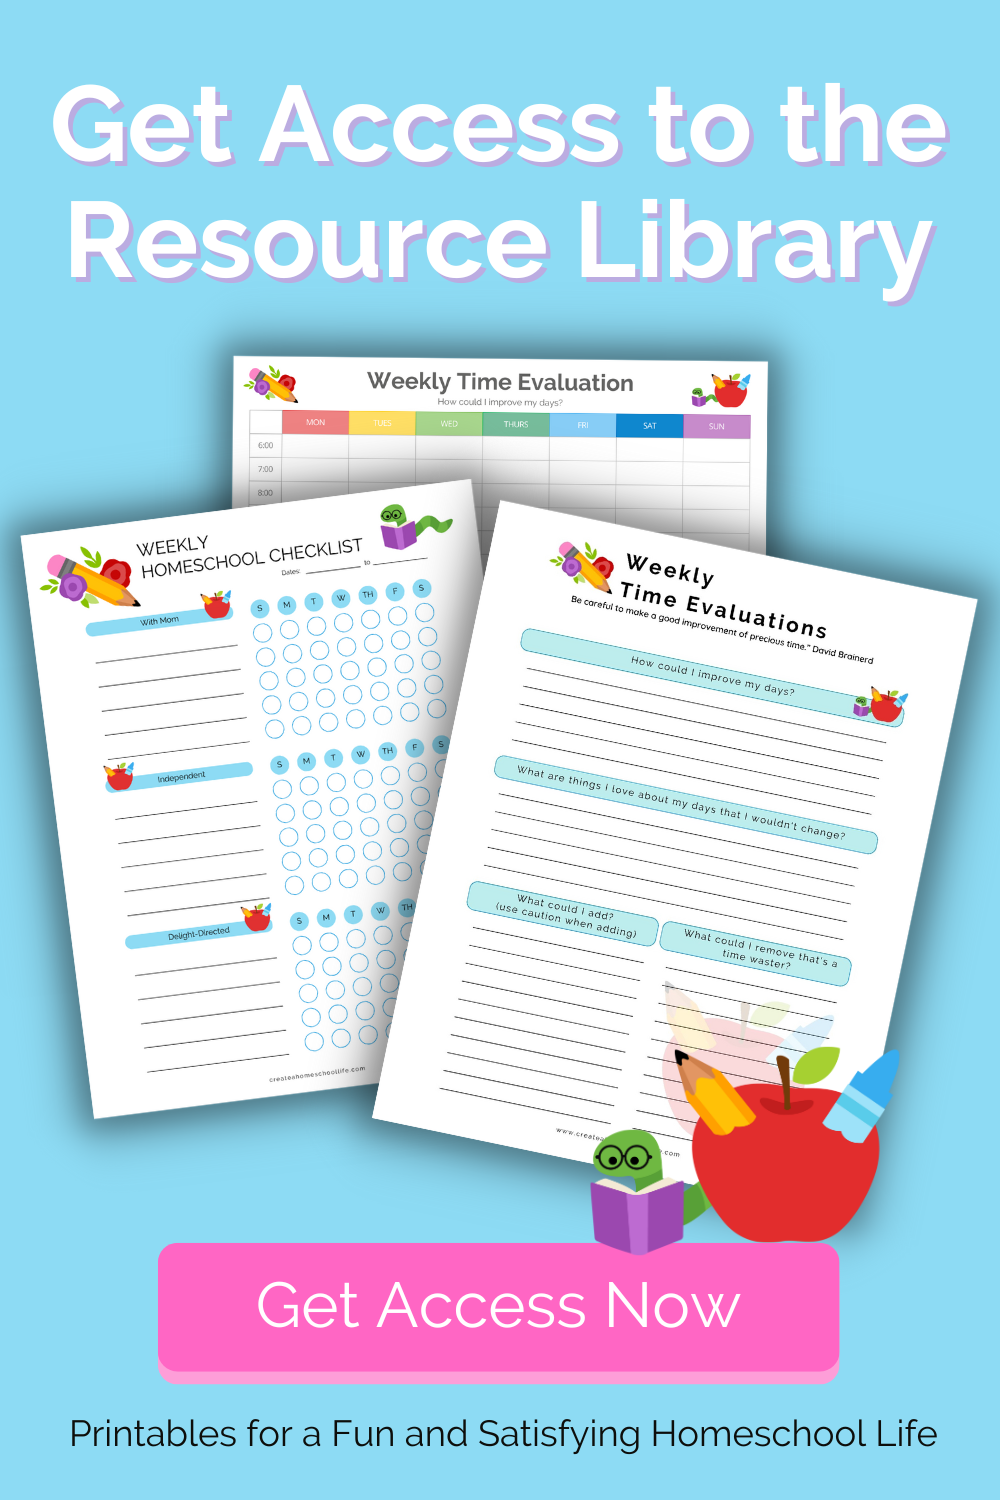 Get access to resource library invitation image.